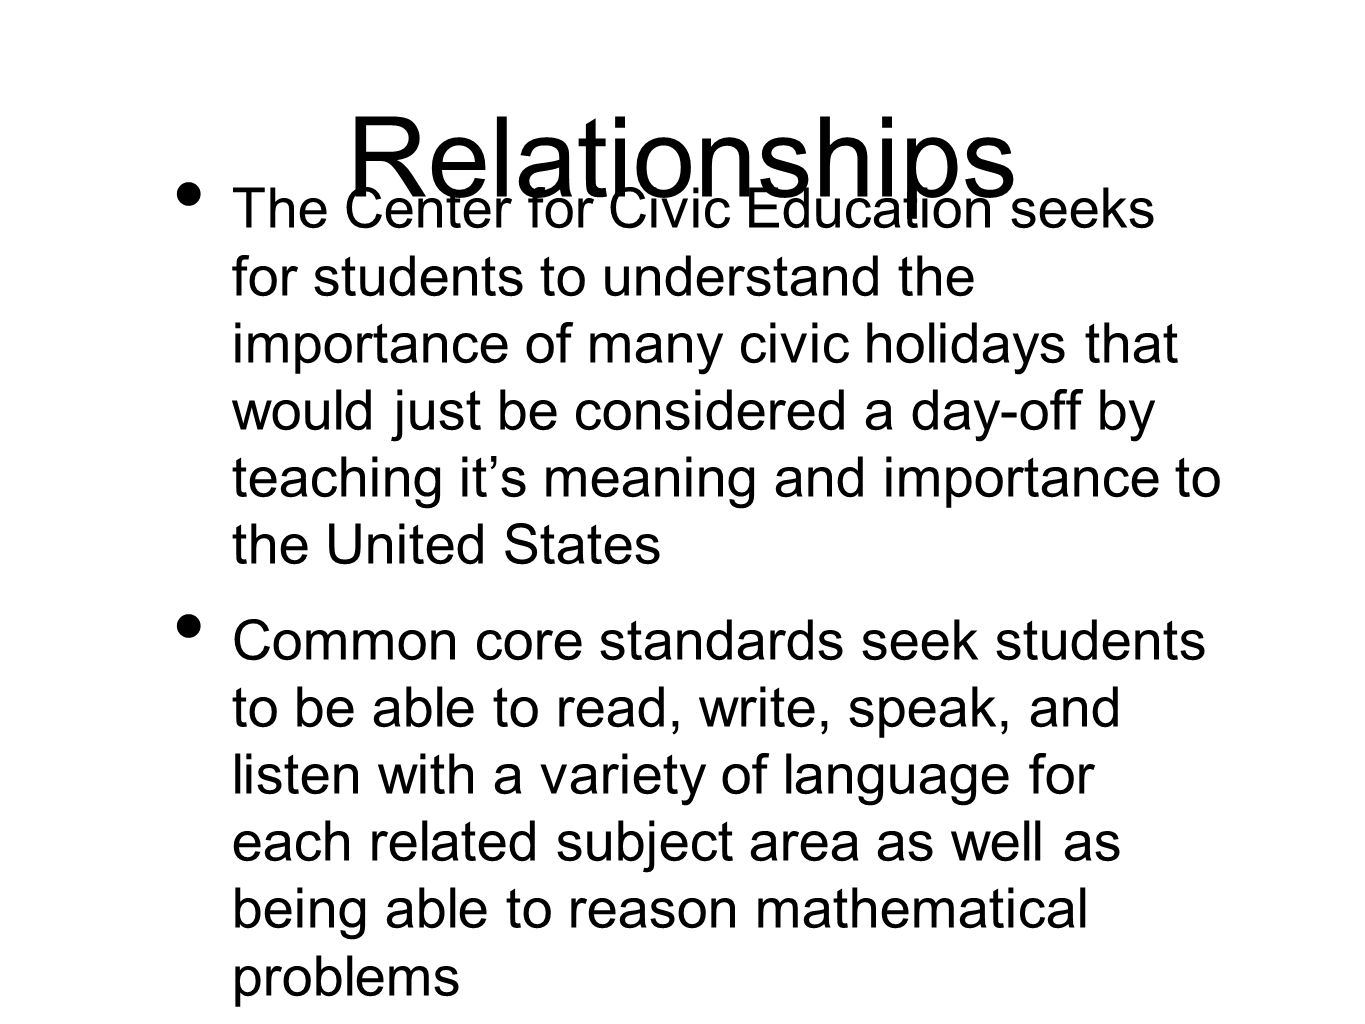 Relationships The Center for Civic Education seeks for students to understand the importance of many civic holidays that would just be considered a day-off by teaching it’s meaning and importance to the United States Common core standards seek students to be able to read, write, speak, and listen with a variety of language for each related subject area as well as being able to reason mathematical problems